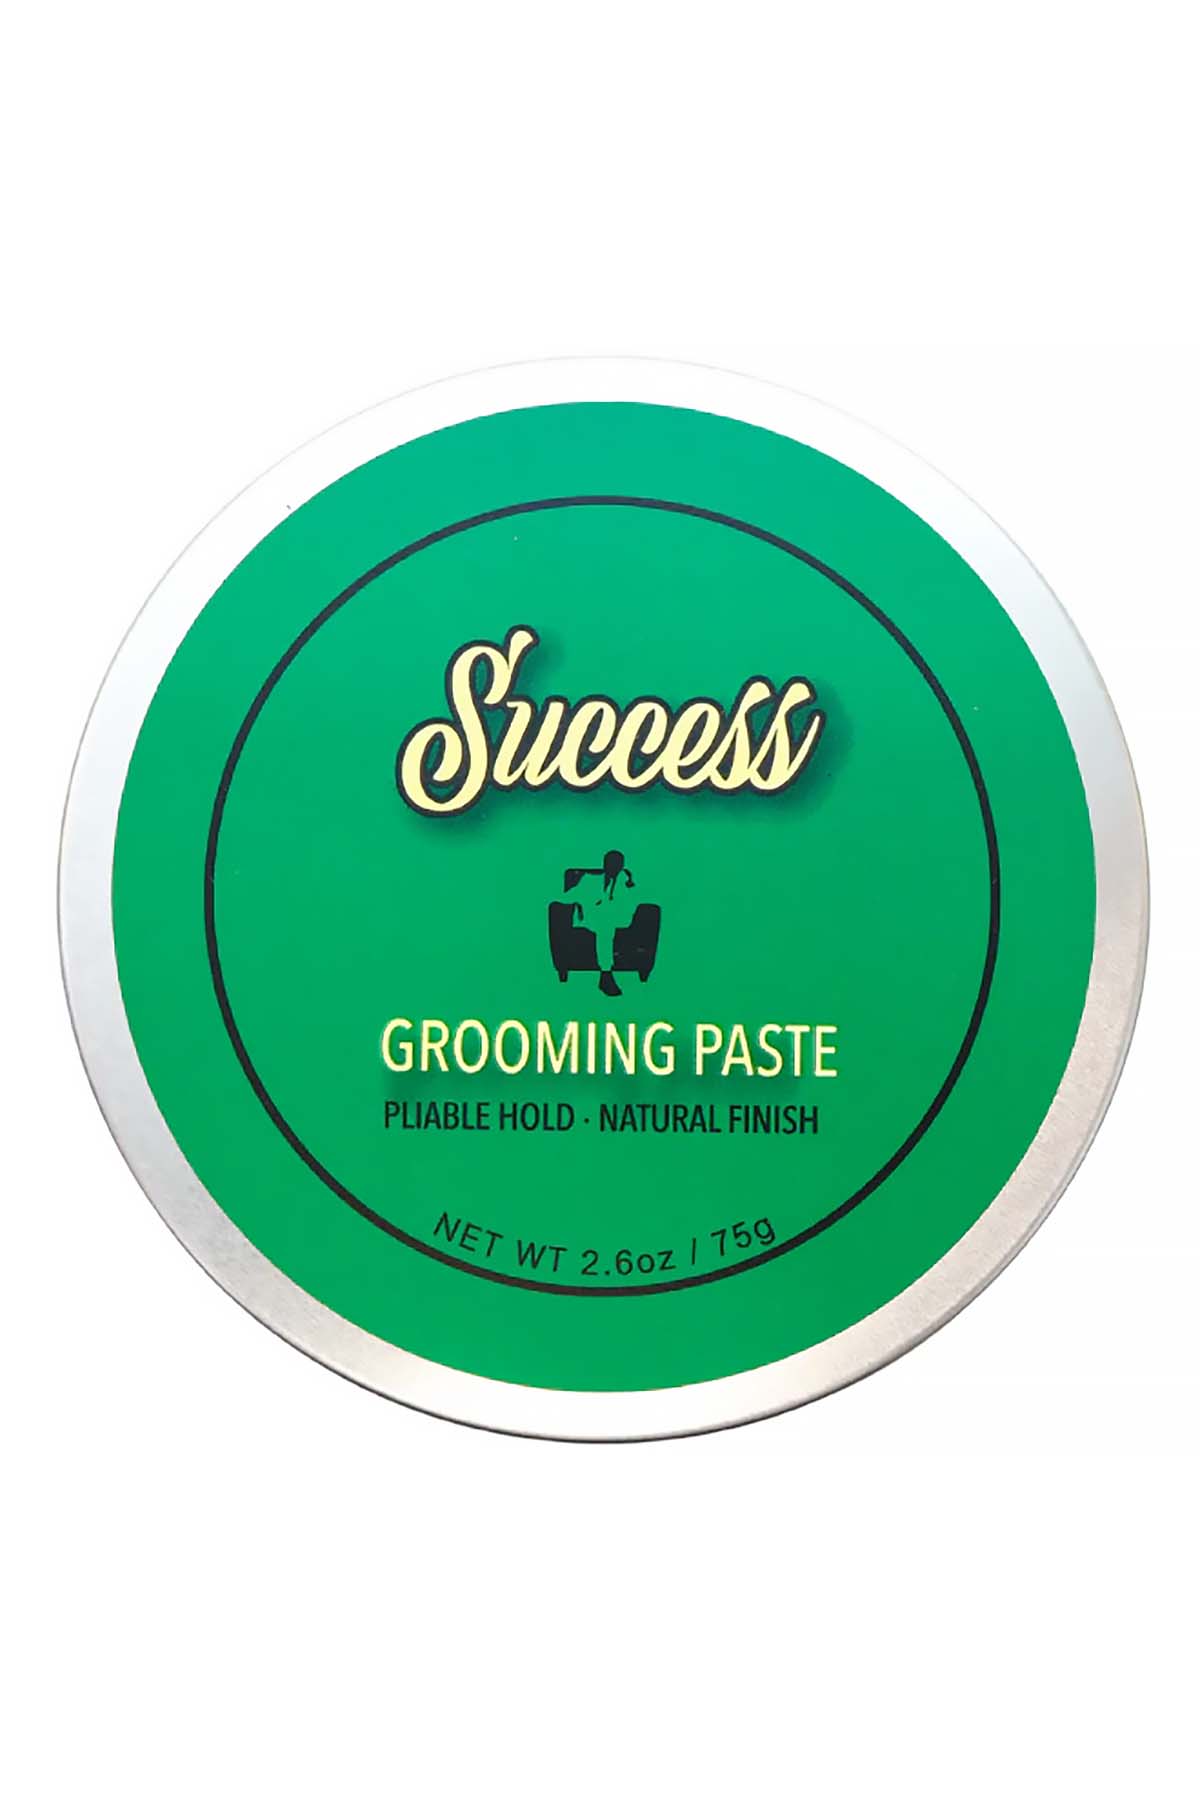 TheSalonGuy Success Grooming Paste